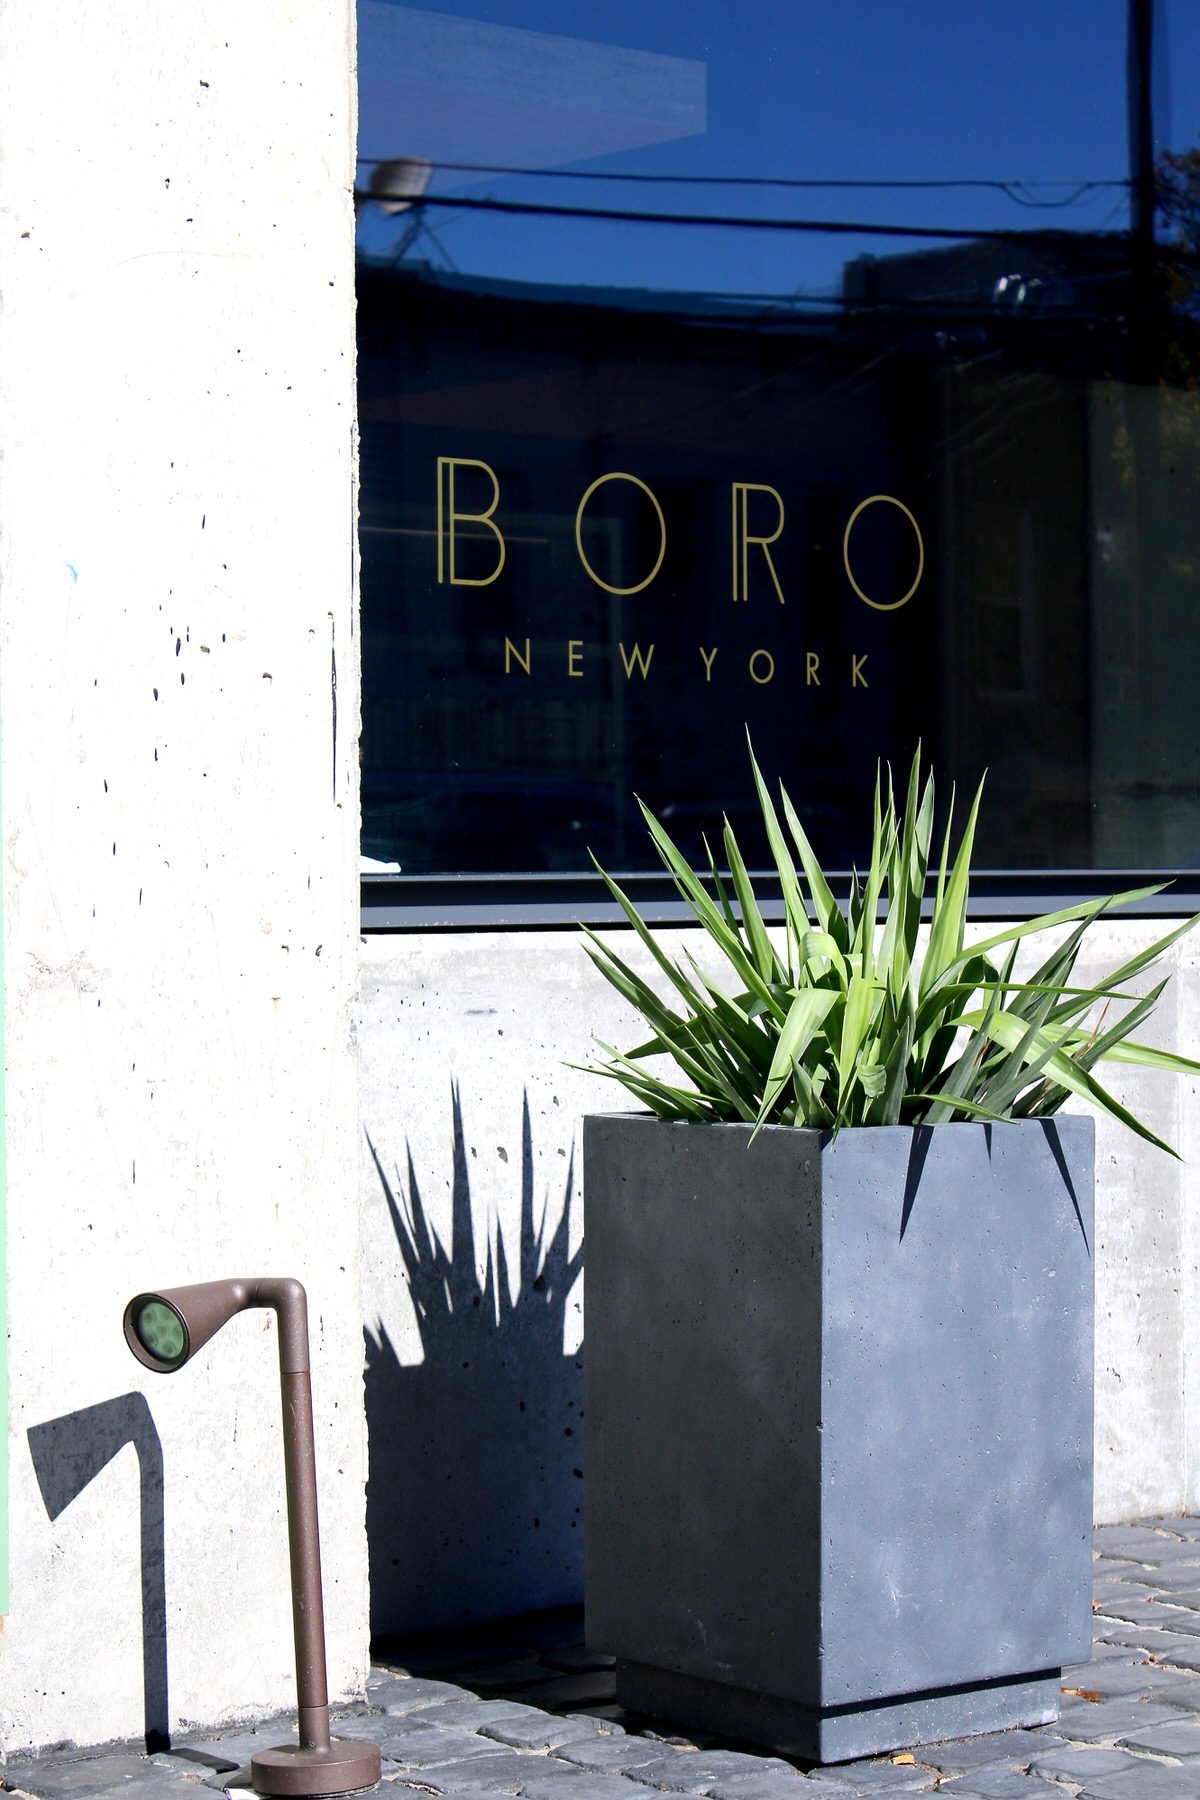 BORO Hotel New York, Brooklyn, Queens, New York, Hotel, Review